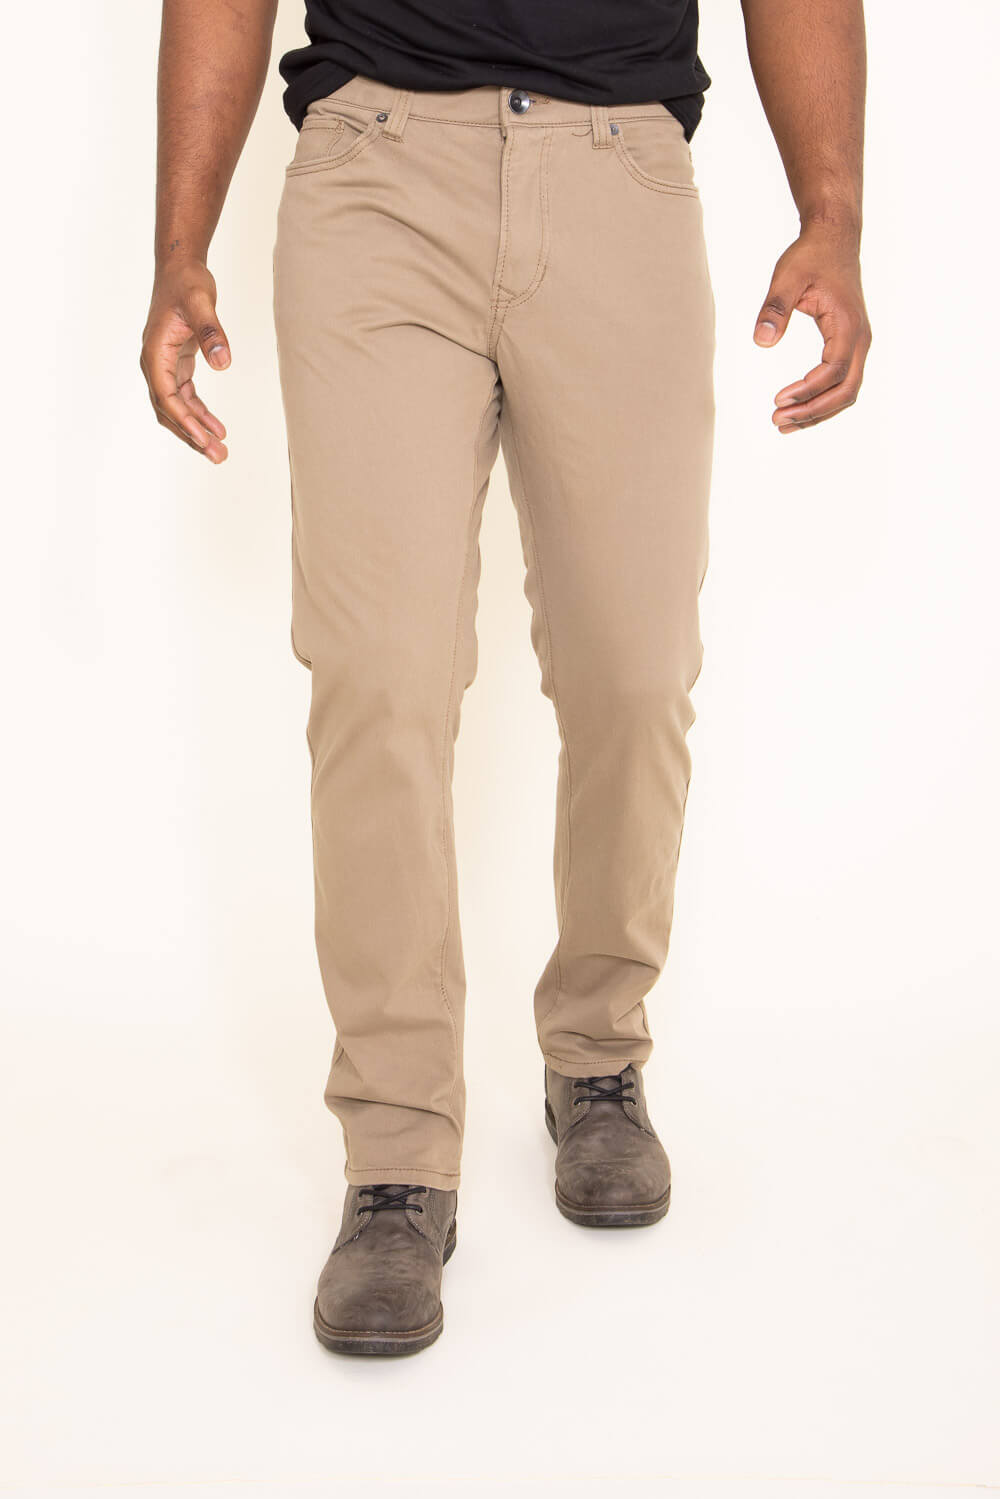 Union Five Pocket Comfort Twill Pants for Men in Brown